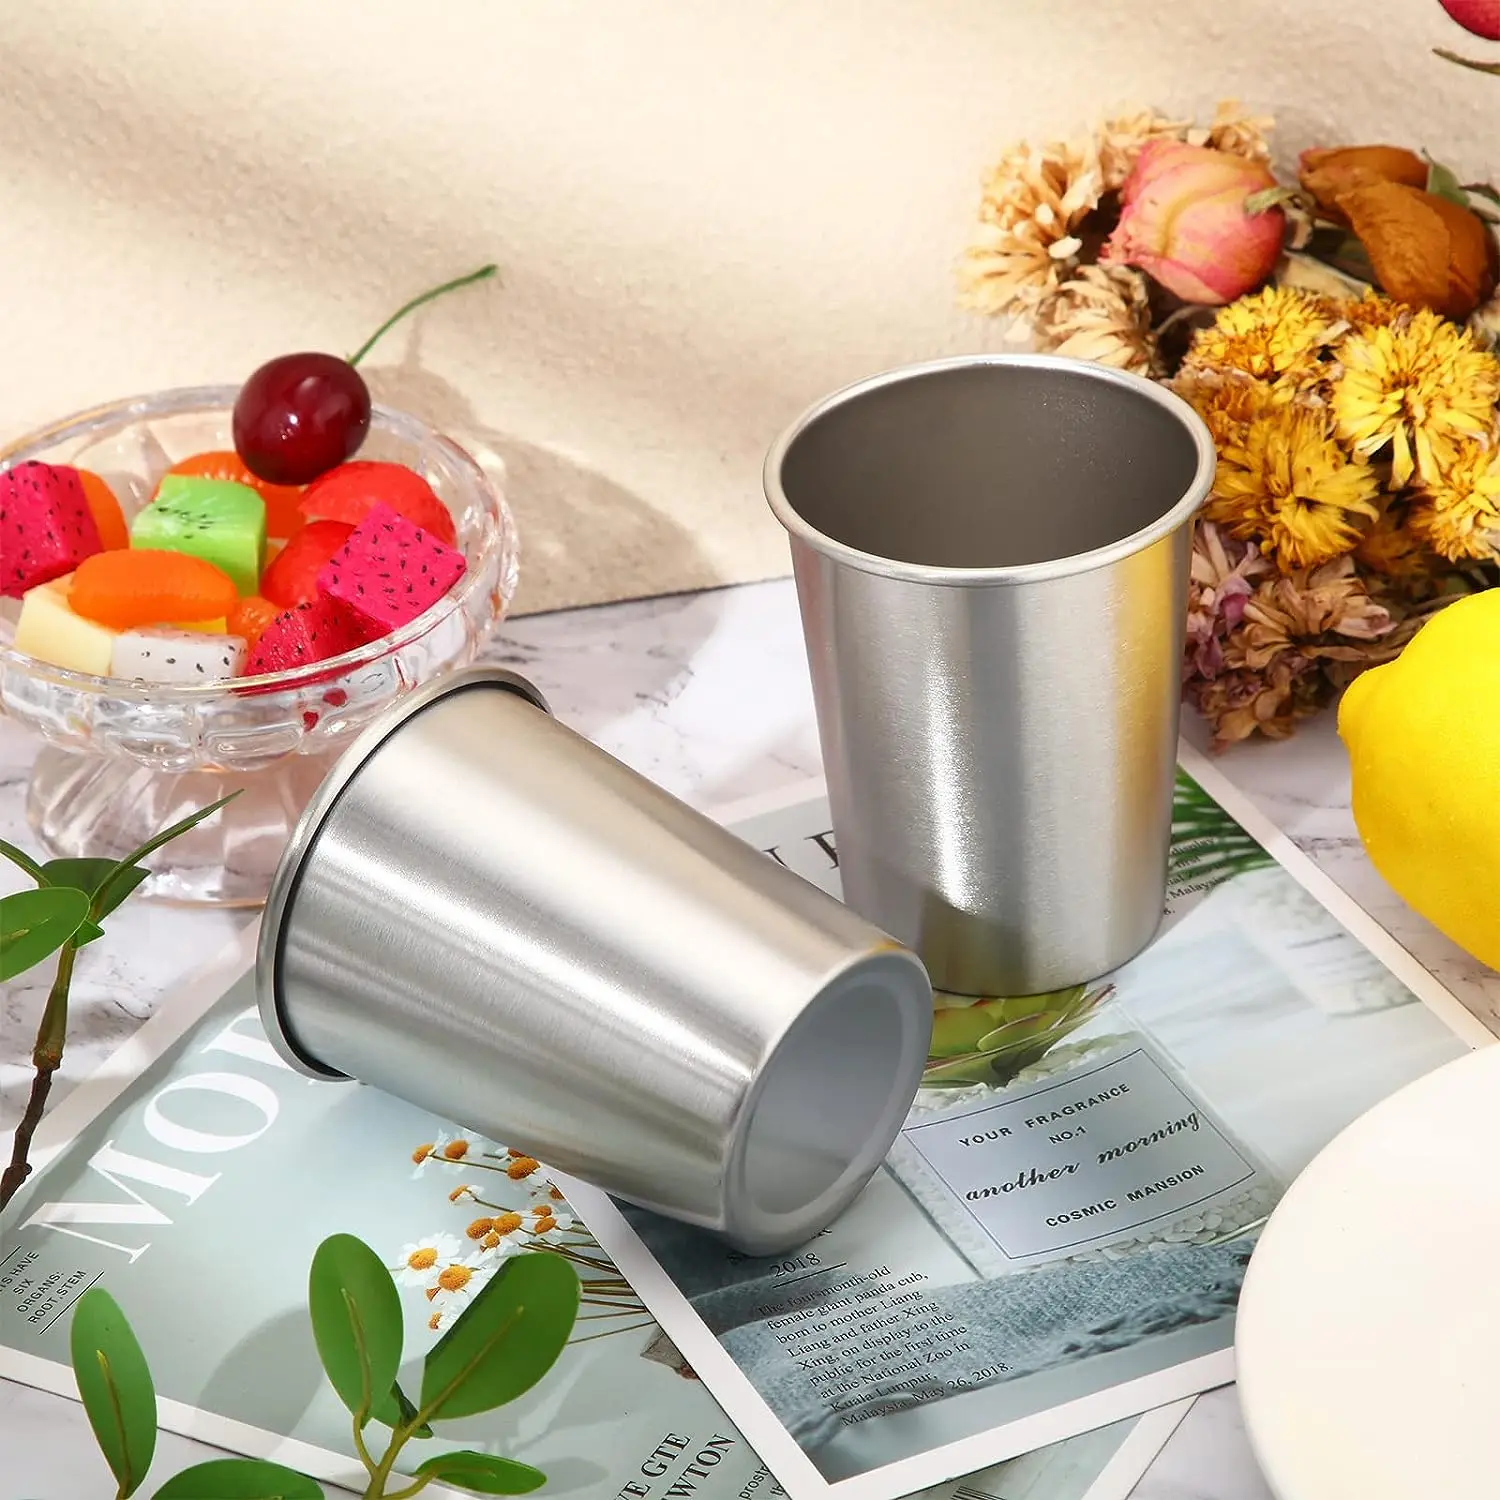 https://ae01.alicdn.com/kf/Se9734617f4954255a293198be8795c61j/10-Pack-260ml-Stainless-Steel-Cups-Metal-Pint-Cups-Unbreakable-Drinking-Glasses-Stackable-Drinking-Cups-for.jpg